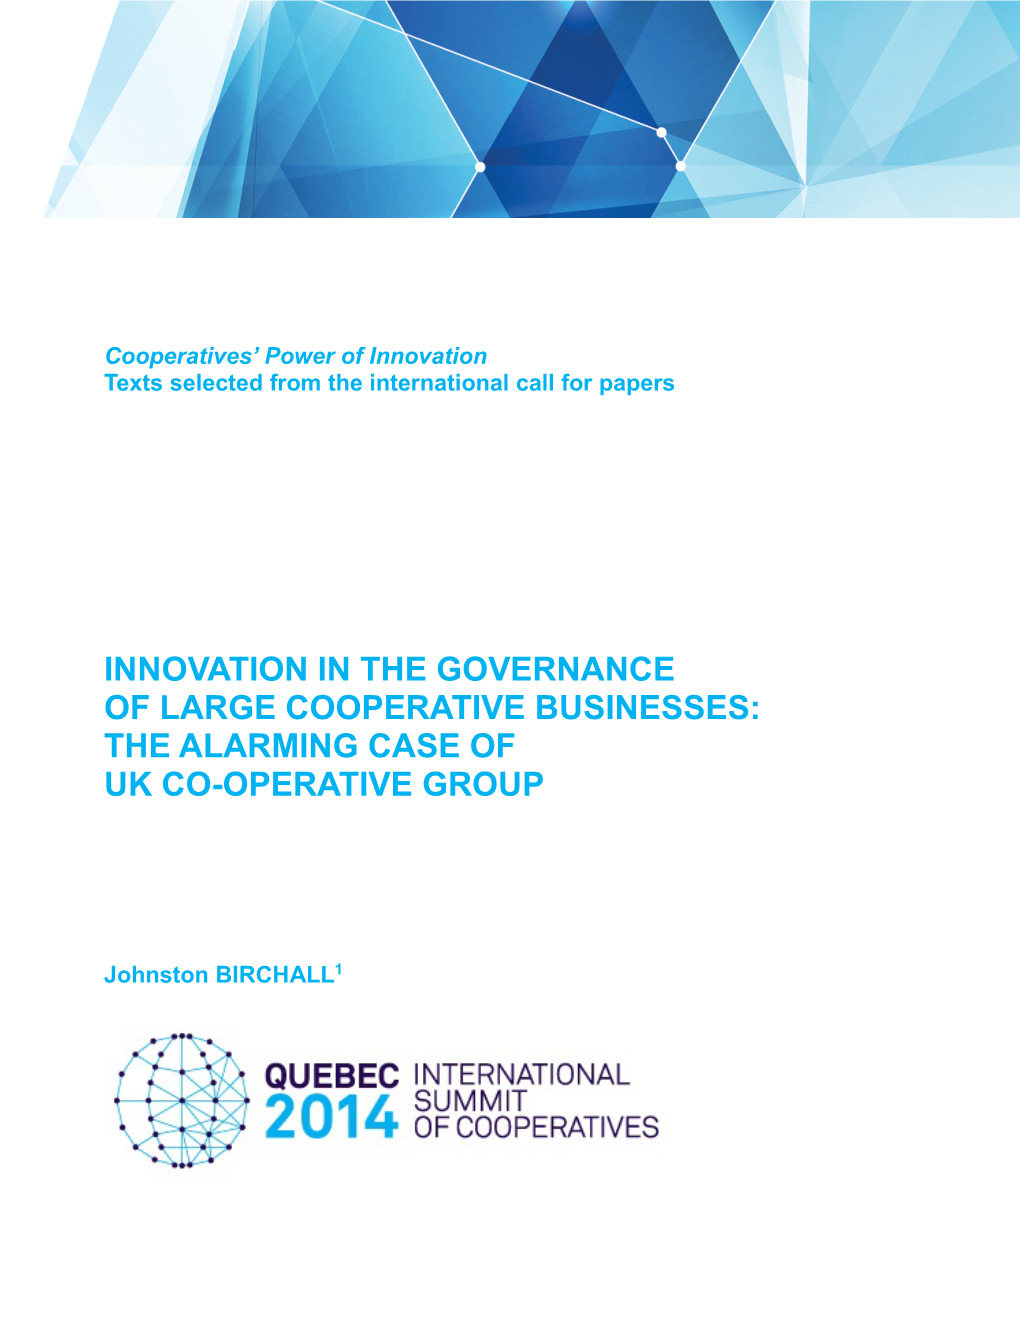 Innovation in the Governance of Large Cooperative Businesses: the Alarming Case of Uk Co-Operative Group